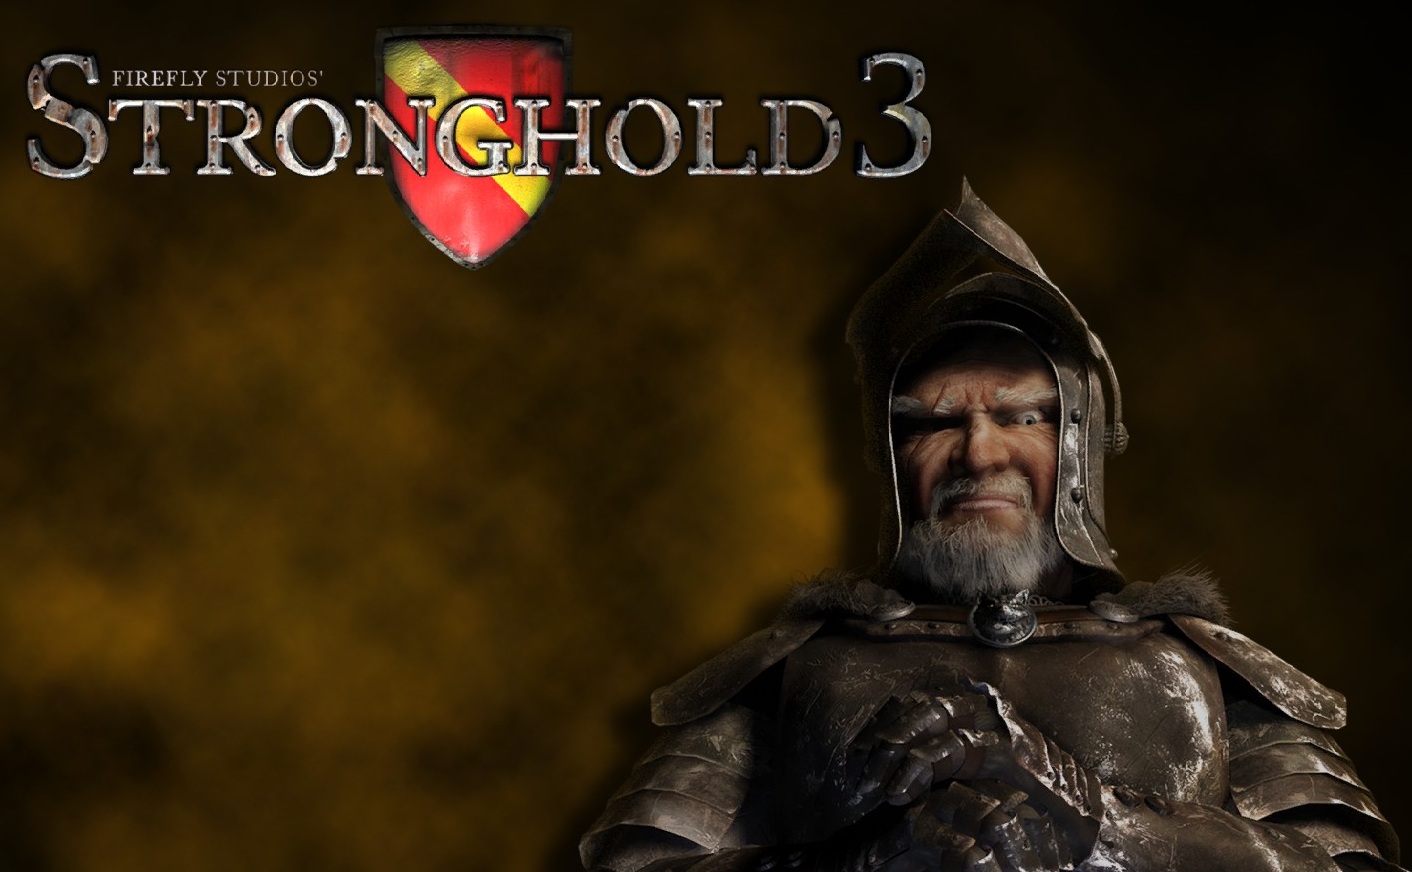 stronghold 3 pc requirements